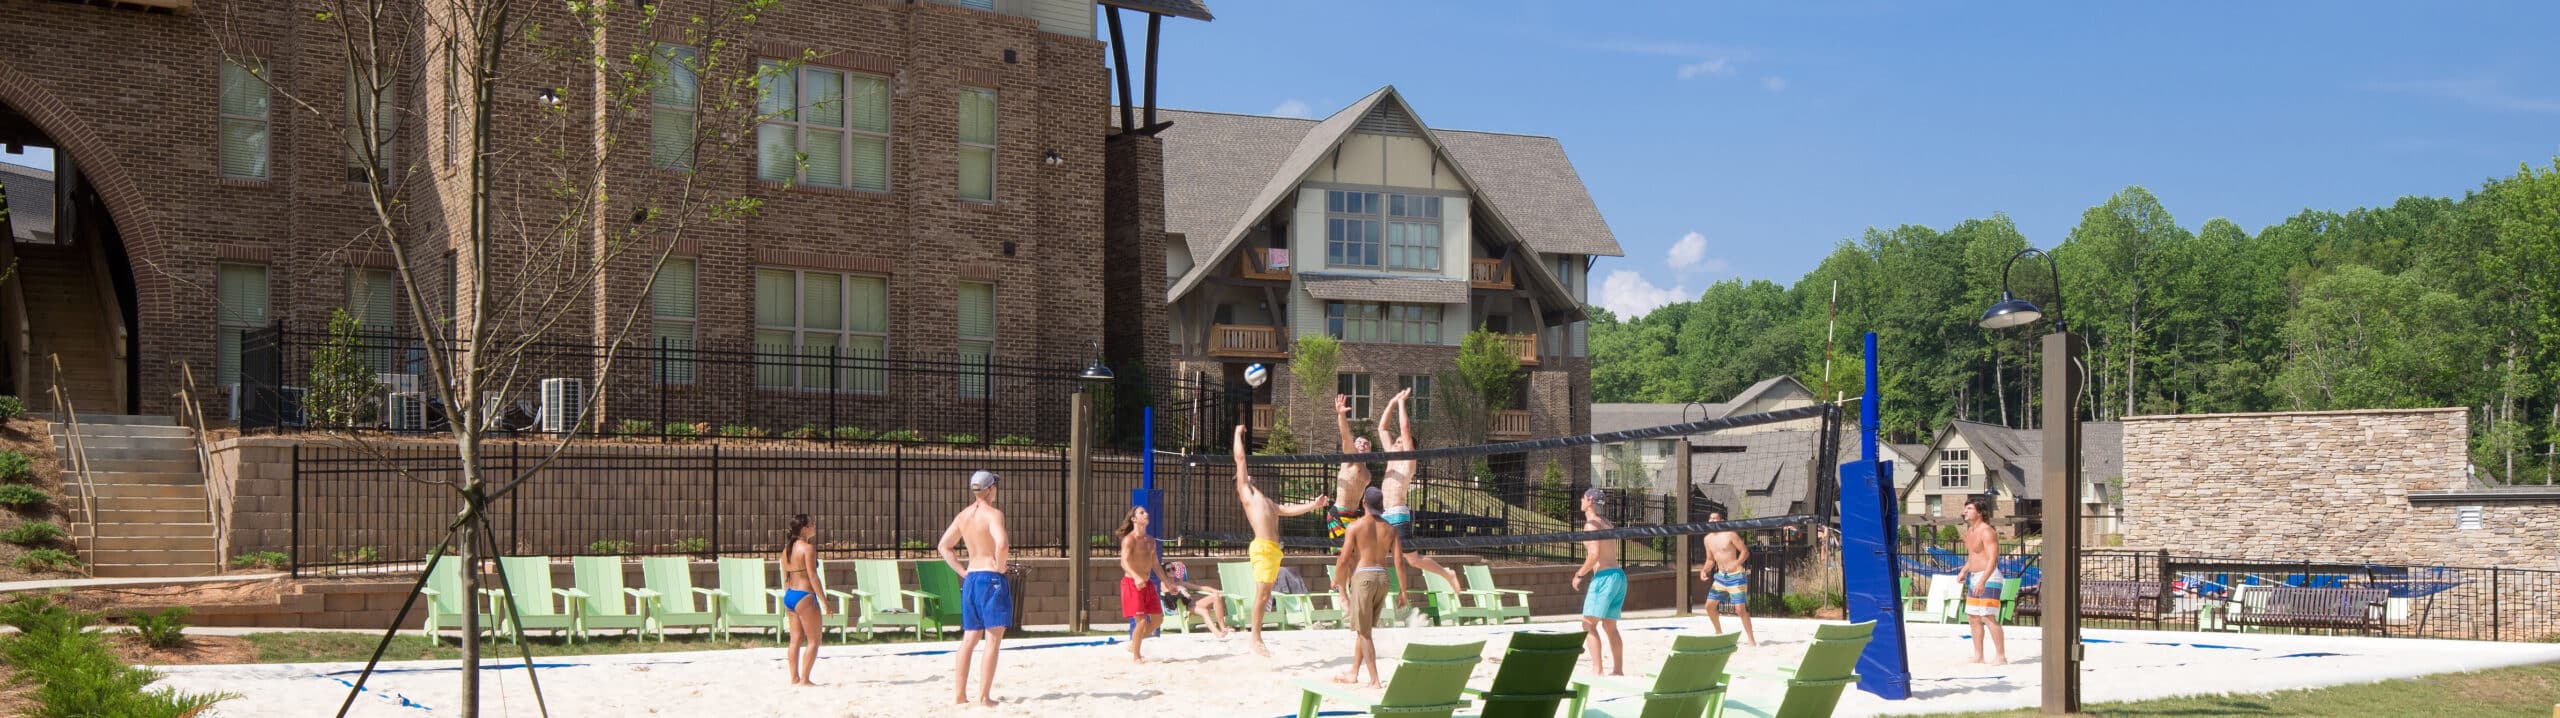 A group of people playing volleyball in front of a building.